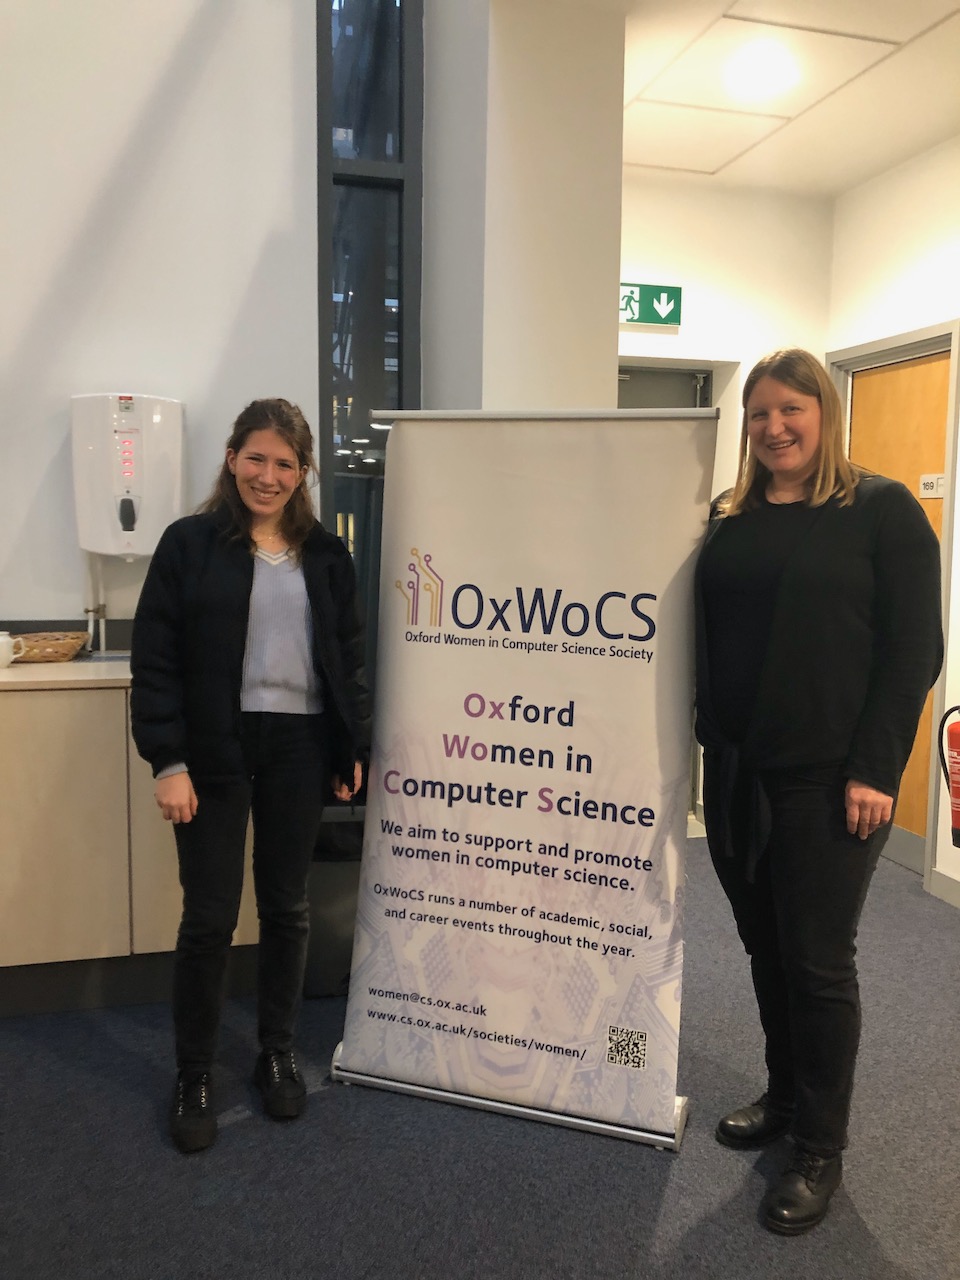 Jasmine Rienecker of OxWoCS, one of the Co-Organisers of the Distinguished Speakers Seminar Series, and Julia Neidhardt.